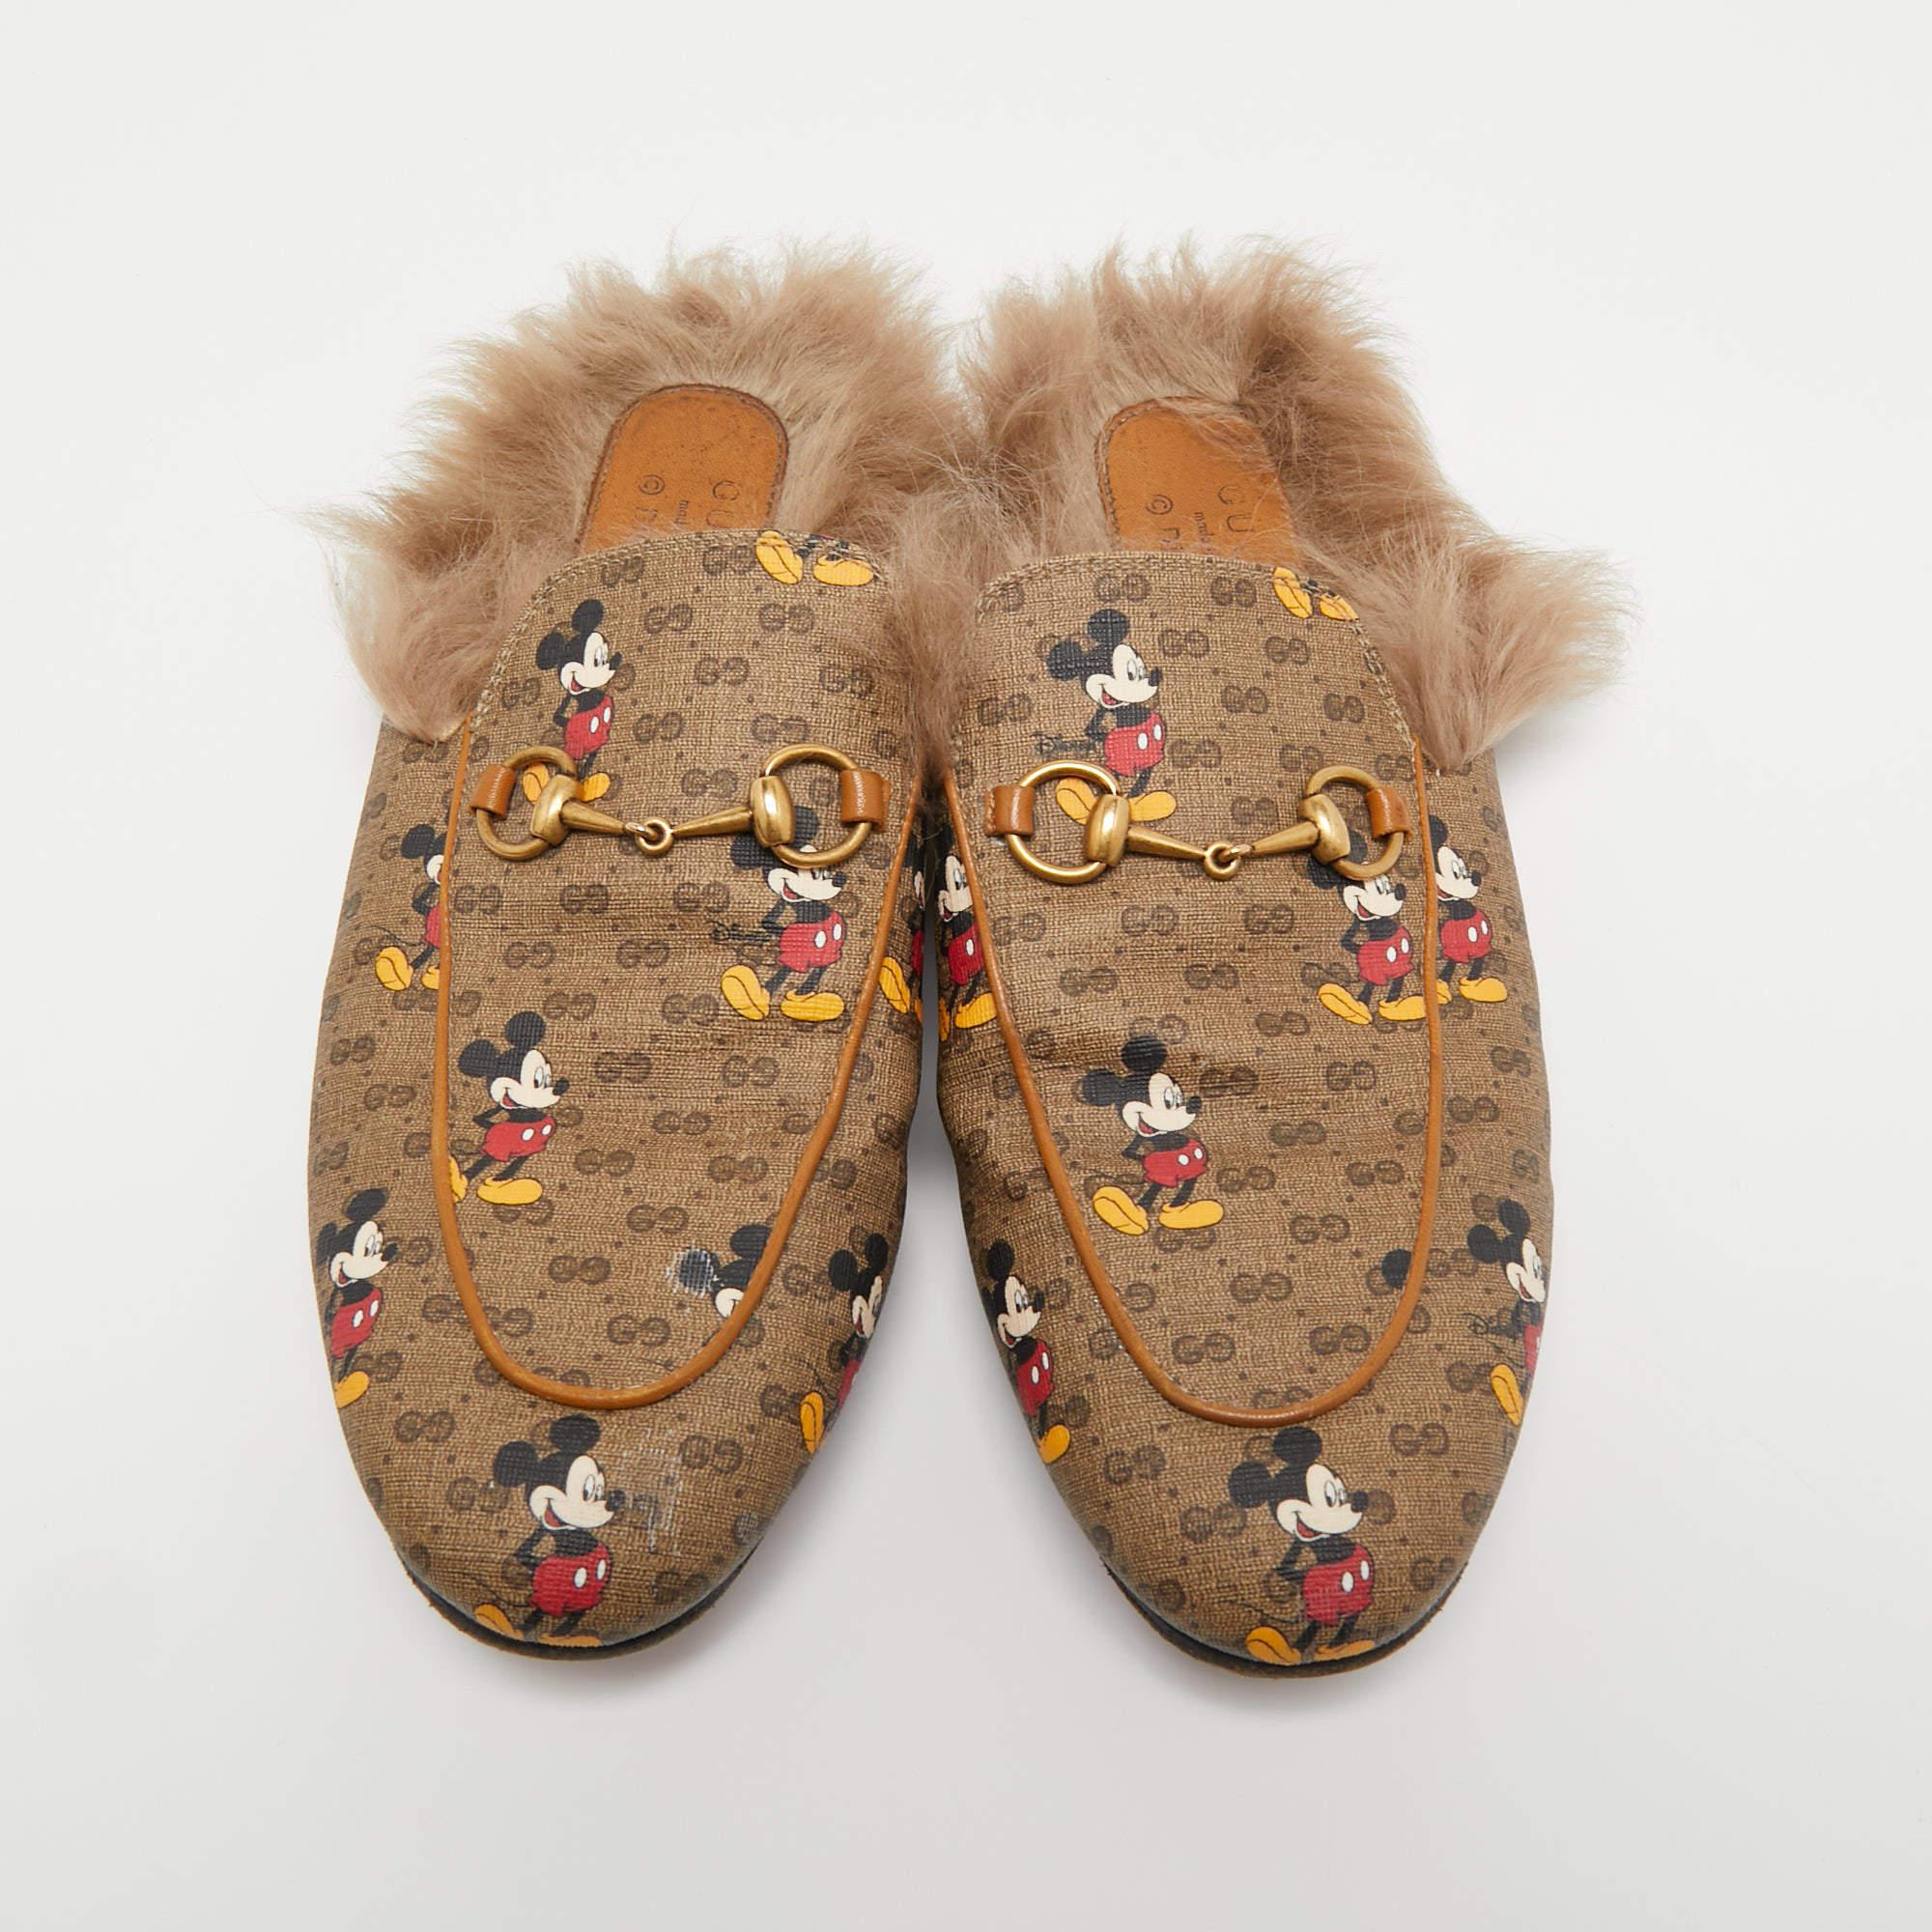 With these Gucci x Disney flat mules, comfort and style are guaranteed. Crafted using coated canvas, they feature a brown hue and rest on durable soles.

